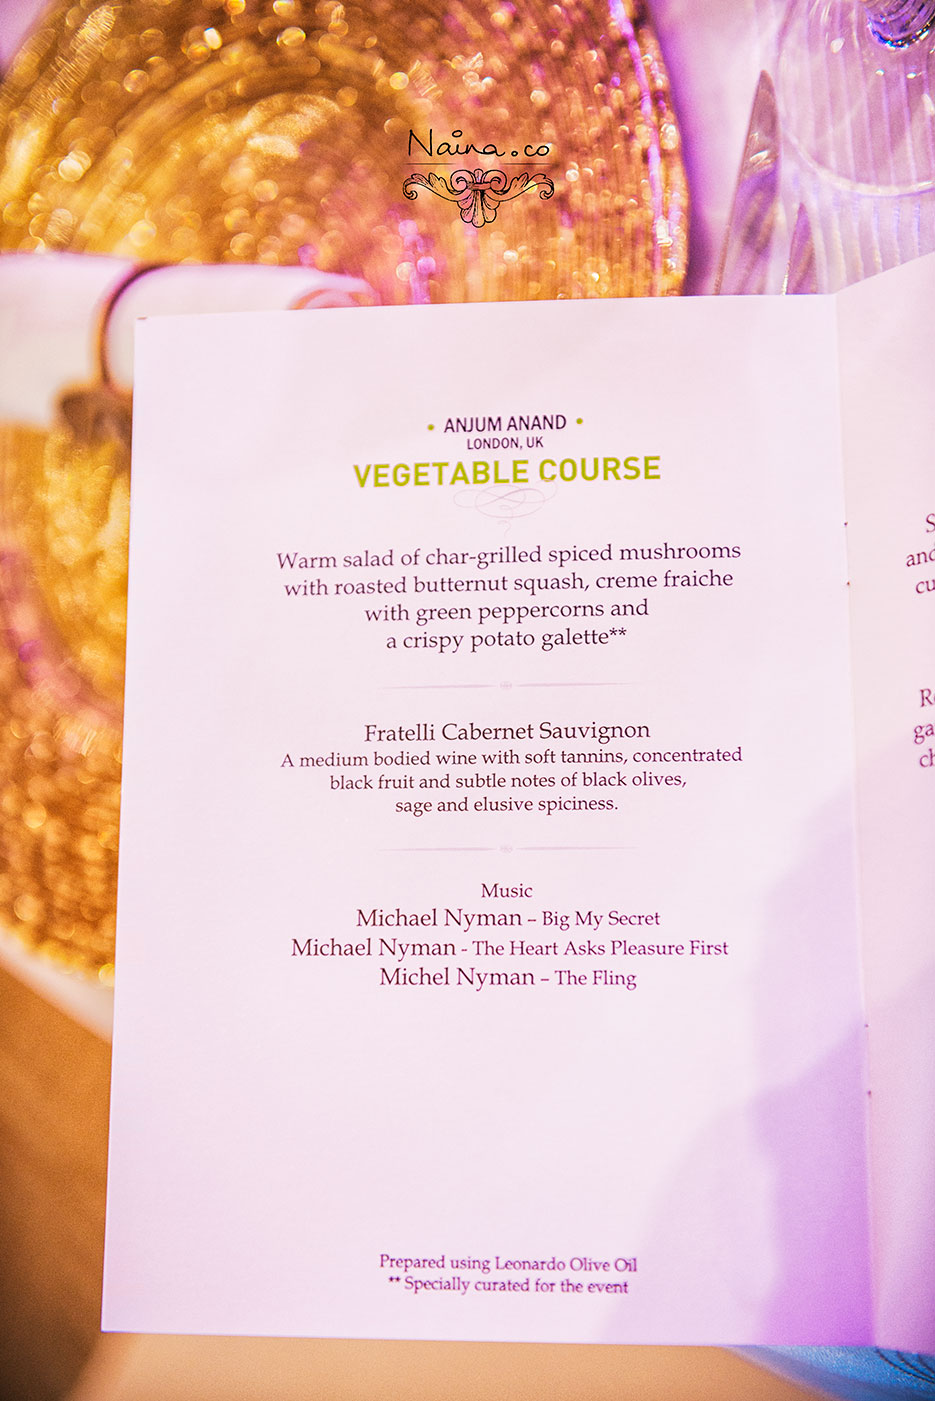 Menu by Michelin Star Chefs for the CSSG Gastronomy Summit 2012, New Delhi, India. Laurie Gear, Ian Curley, Vineet Bhatia, Frances Atkins, Marcello Tully, Anjum Anand. Food Photography by photographer Naina Redhu of Naina.co